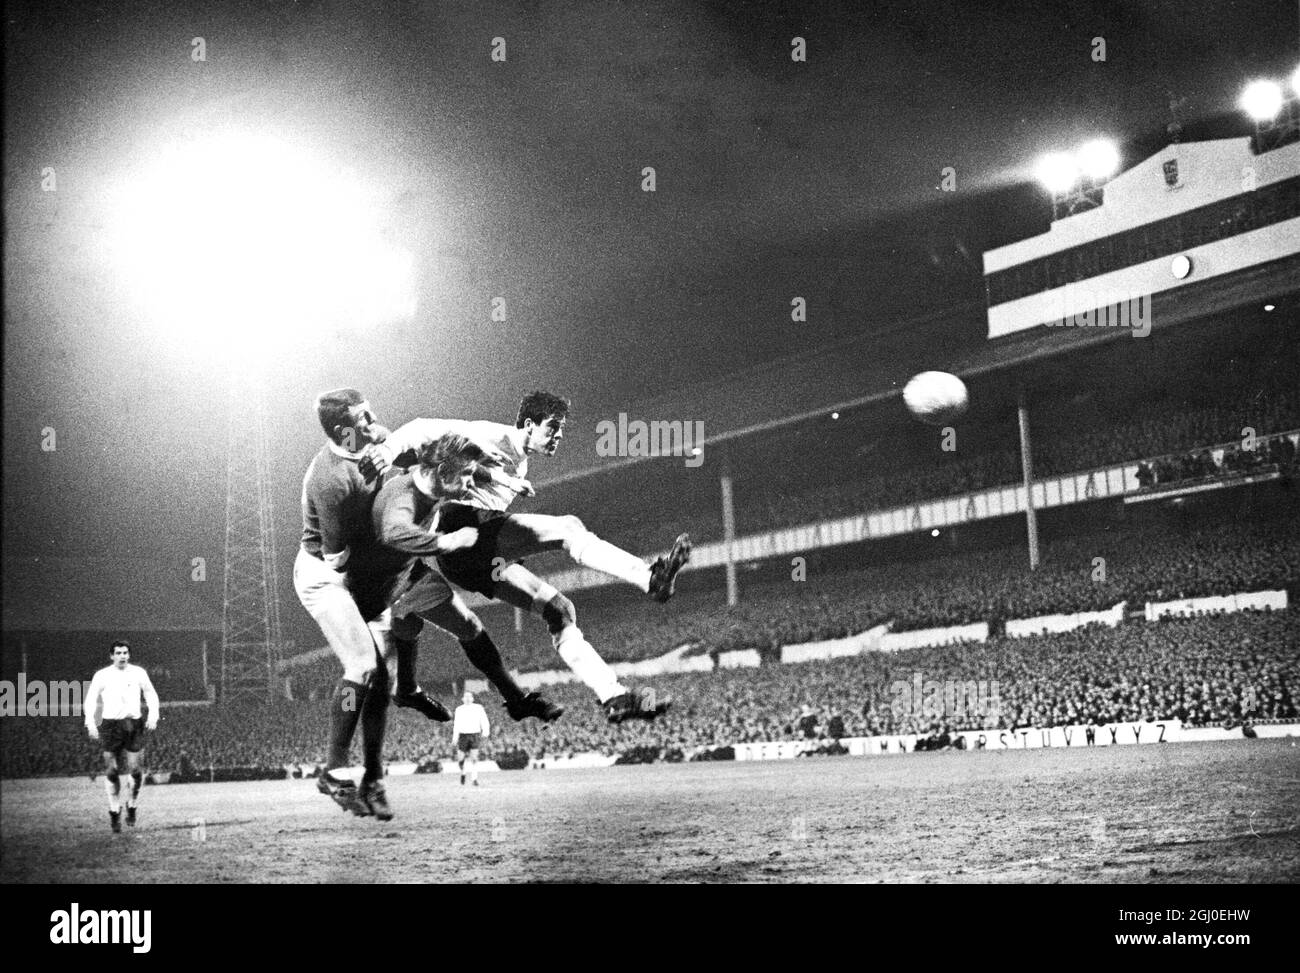 Tottenham Hotspur v Manchester United Mike England (Spurs) in white shirt beats two Manchester United players in a mid air clash during the FA Cup third round replay at White Hart Lane. 31st January 1968. Stock Photo